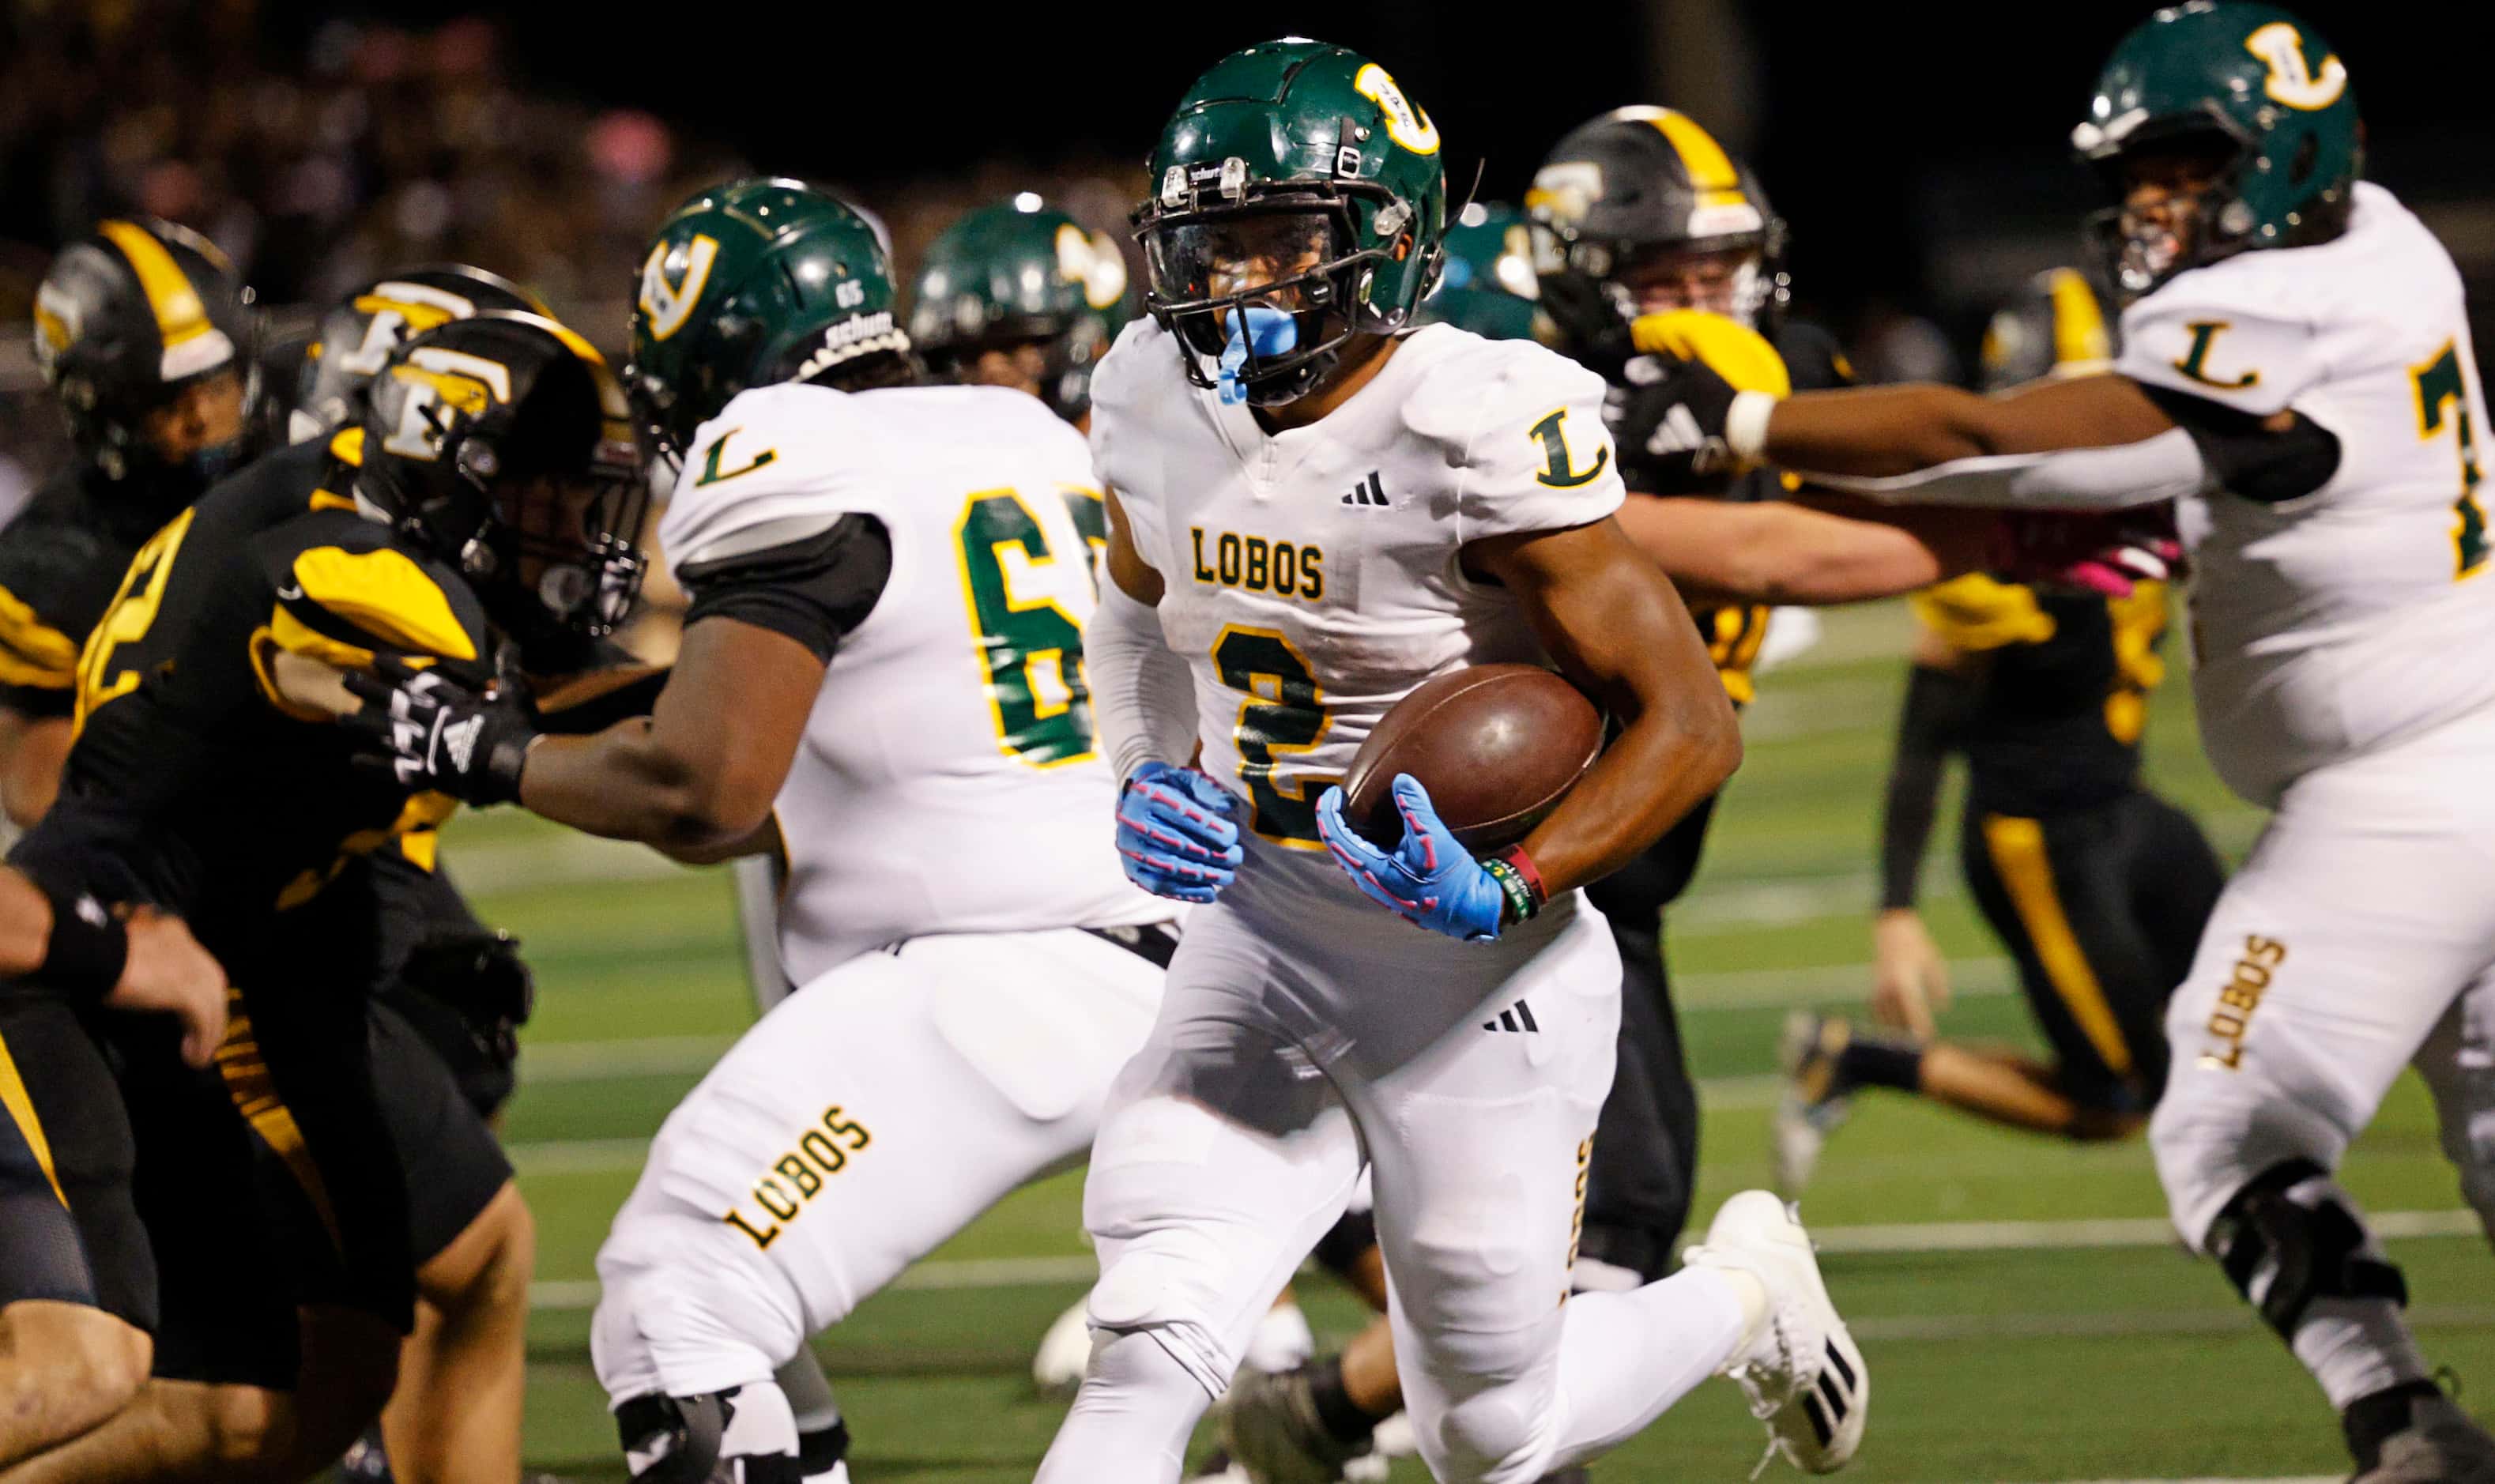 Longview's Taylor Tatum (2) scores a touchdown over Forney during the first half of a high...